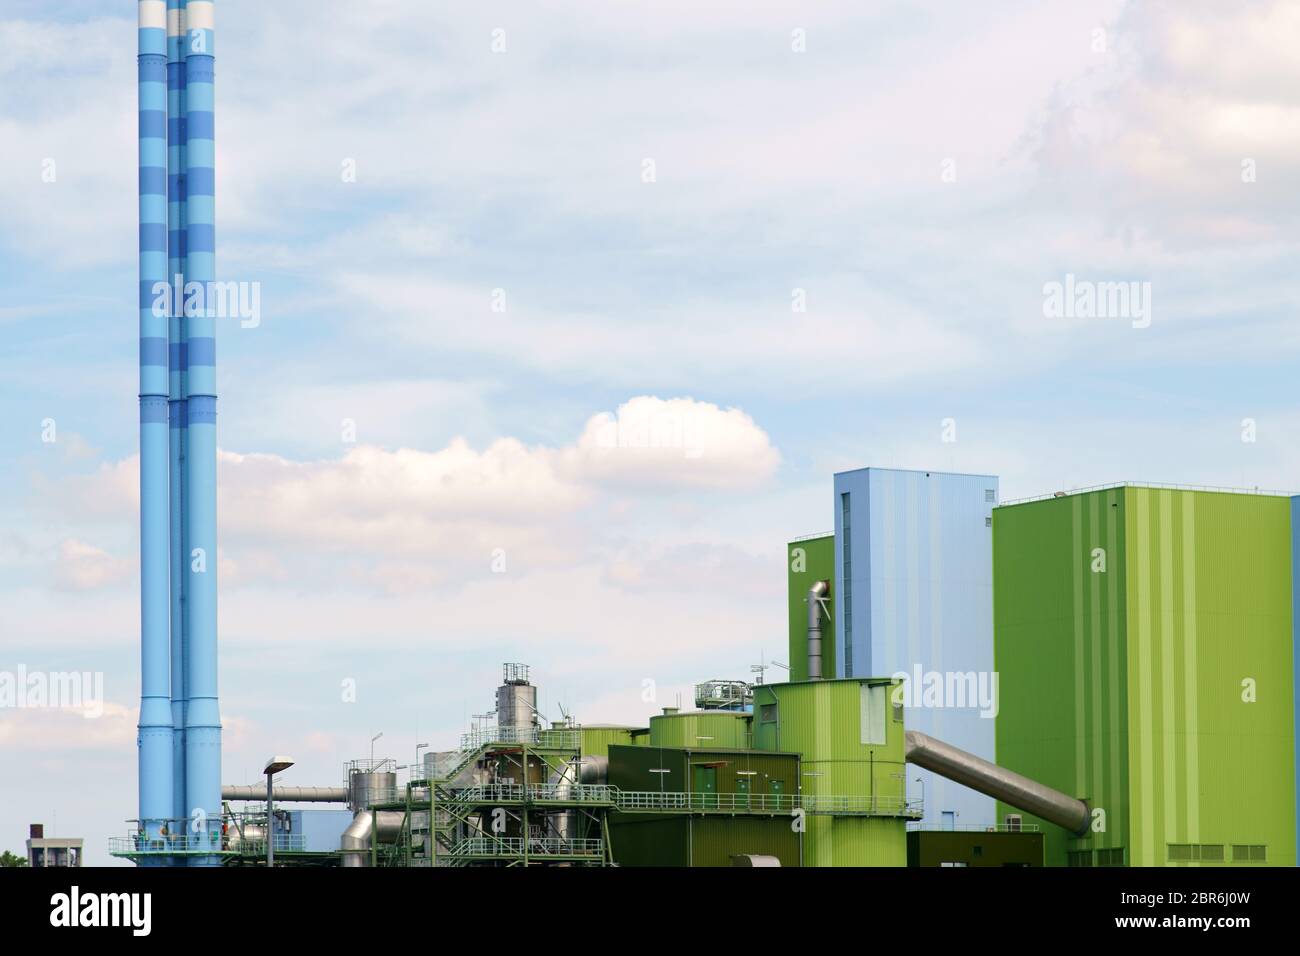 The colorfully painted chimney as well as the industrial buildings of a power plant. Stock Photo